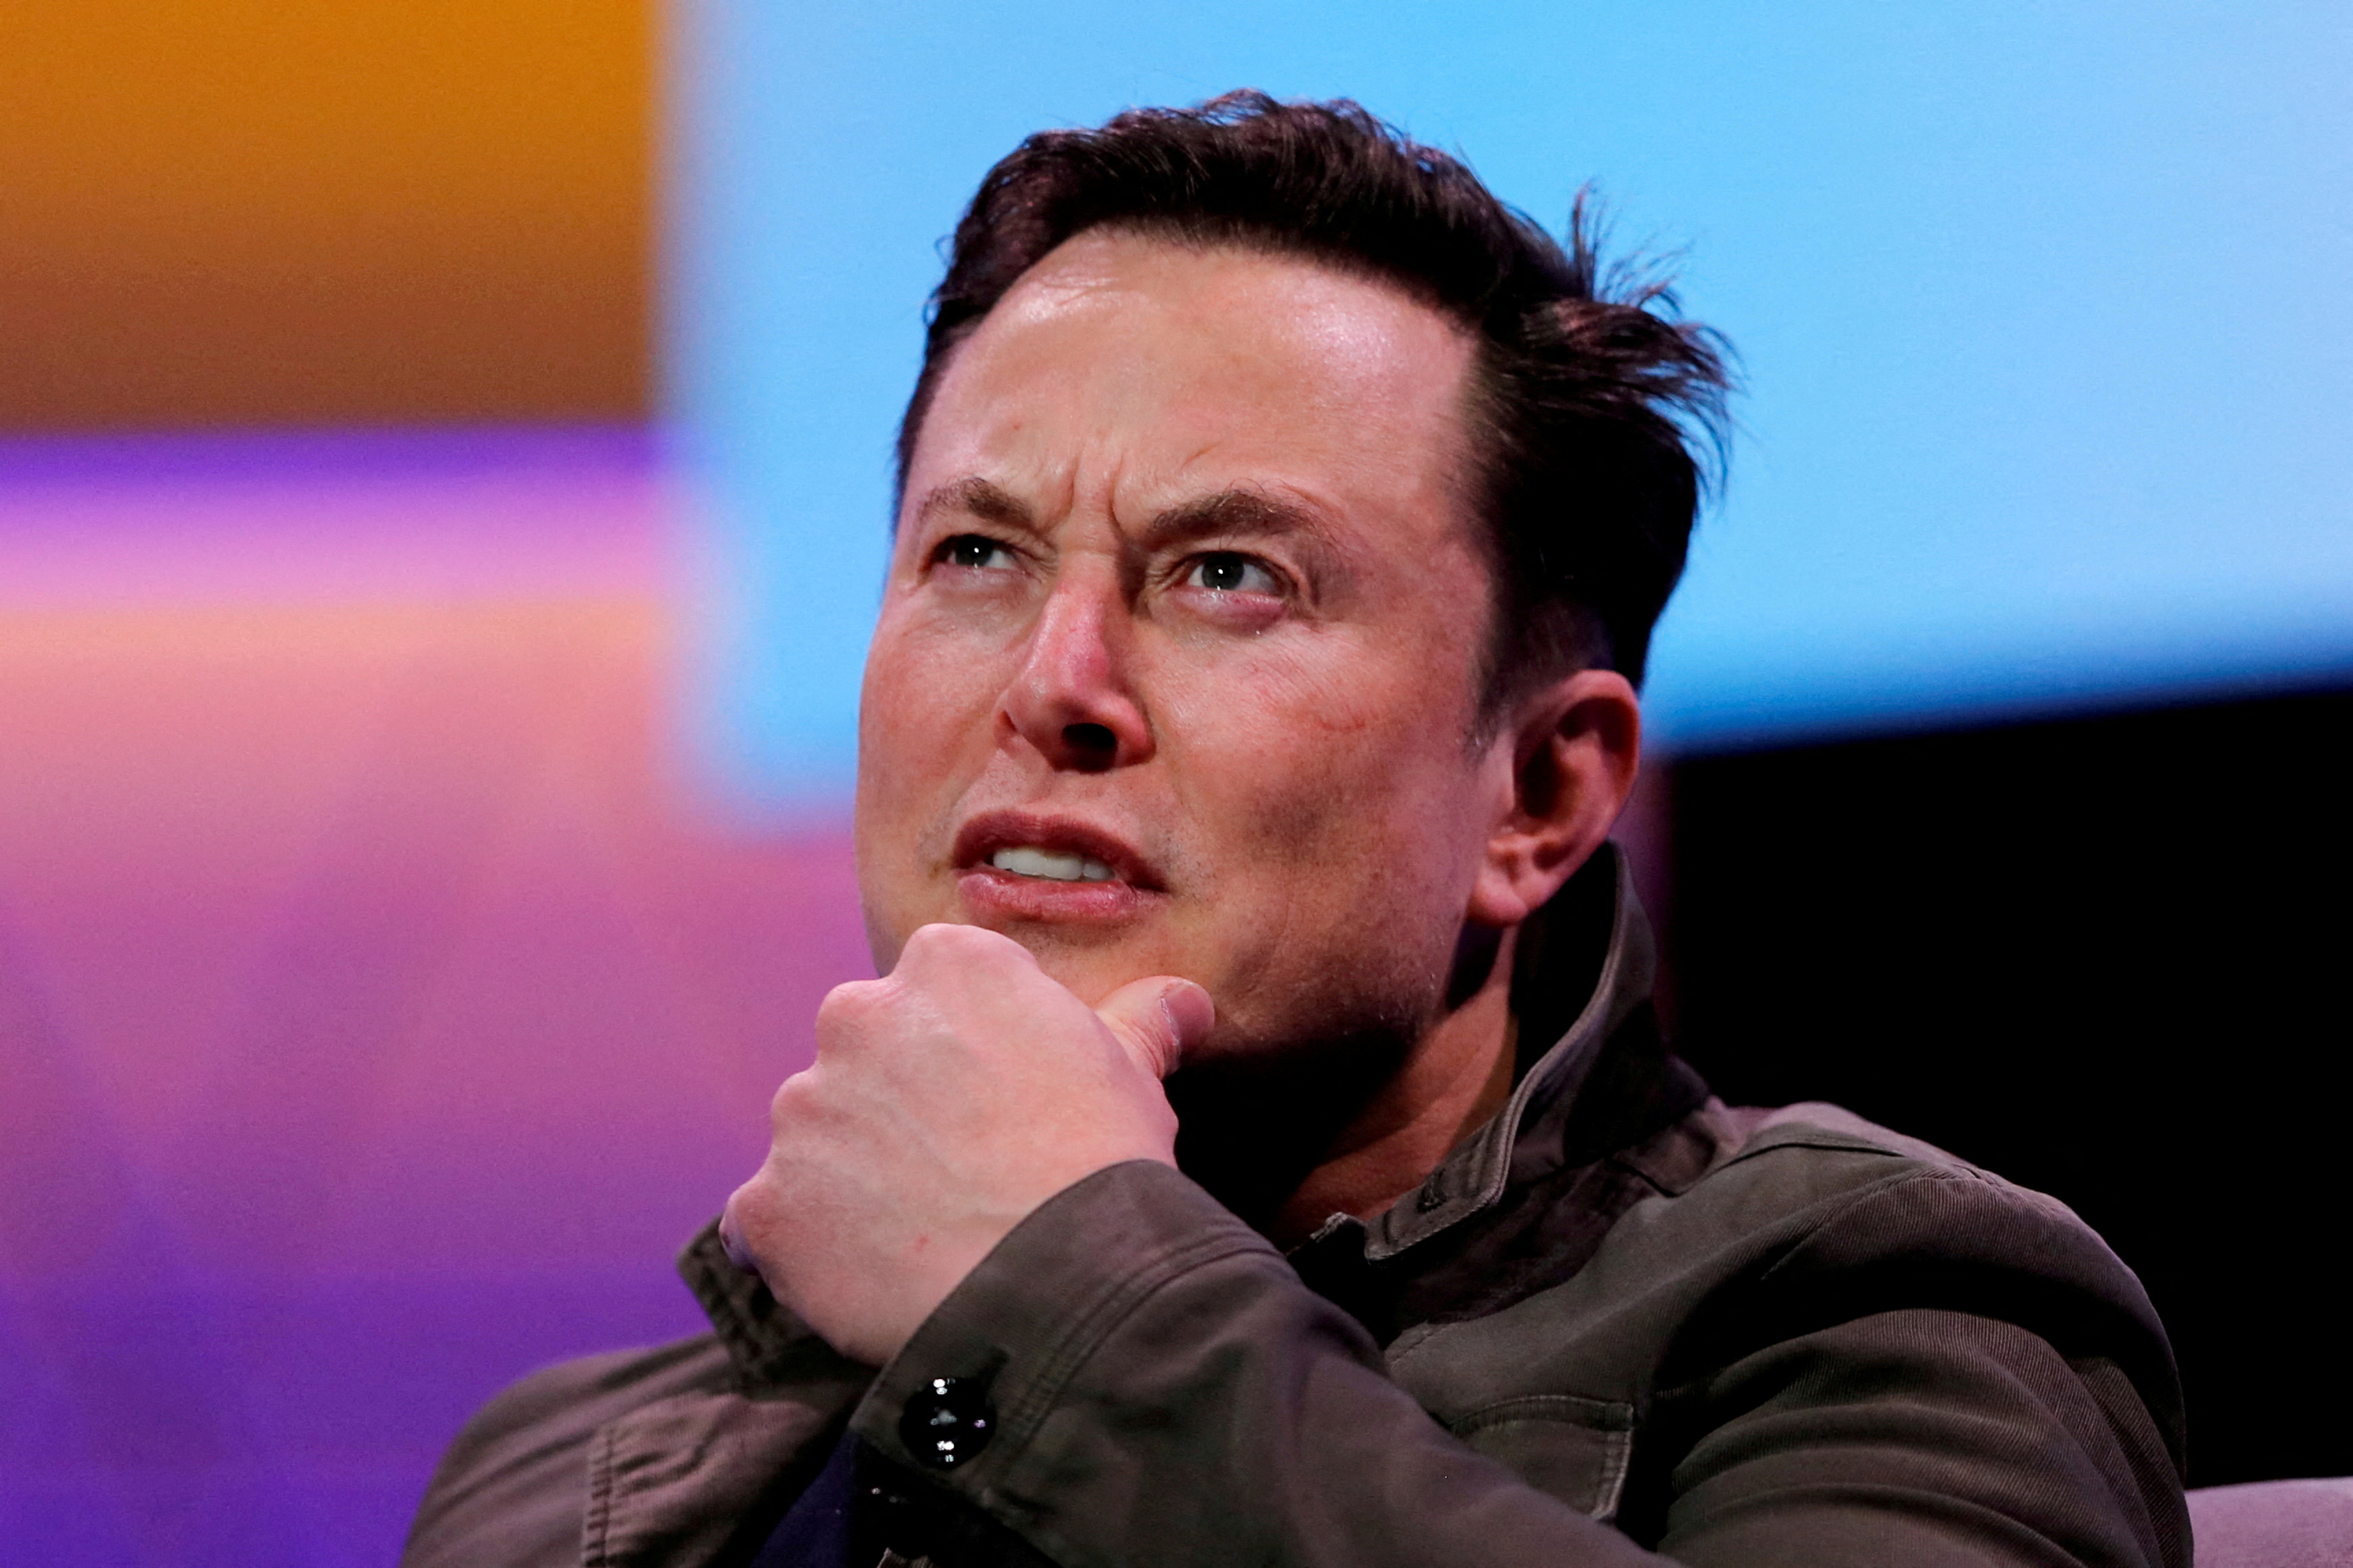 Elon Musk pictured at the E3 gaming convention in Los Angeles